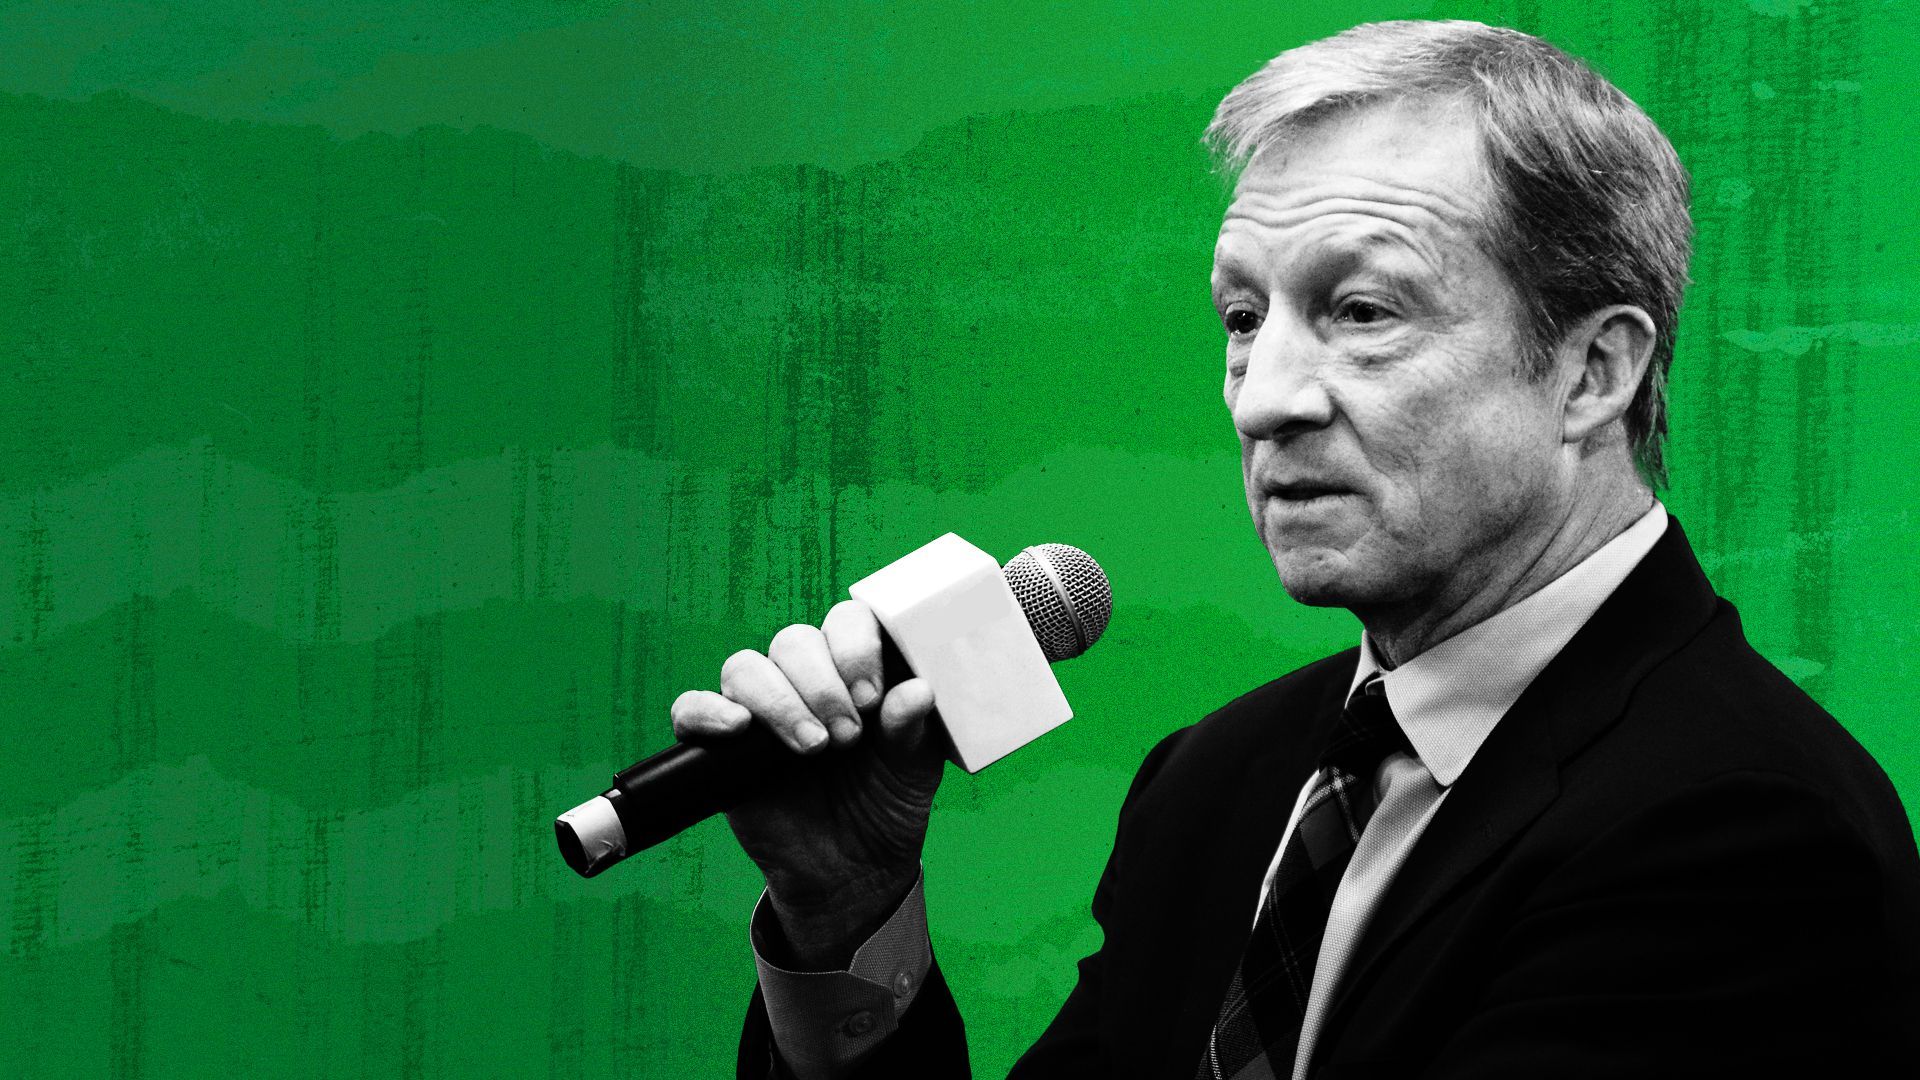 Photo illustration of Tom Steyer against a green background.